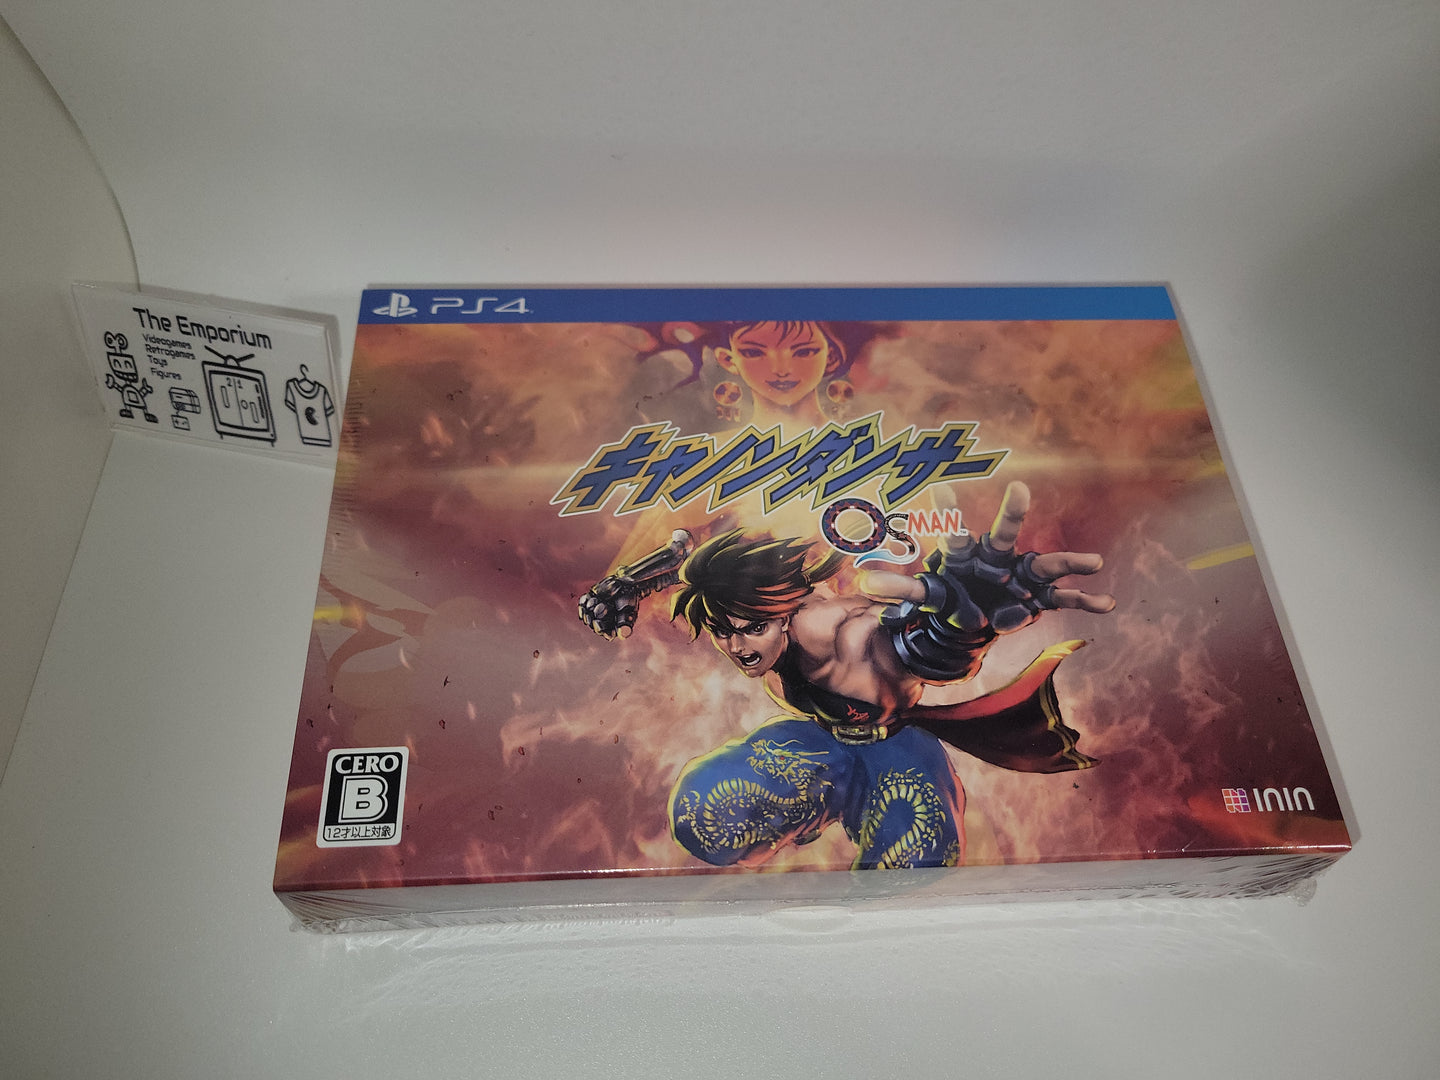 Cannon Dancer OSMAN limited edition - Sony PS4 Playstation 4